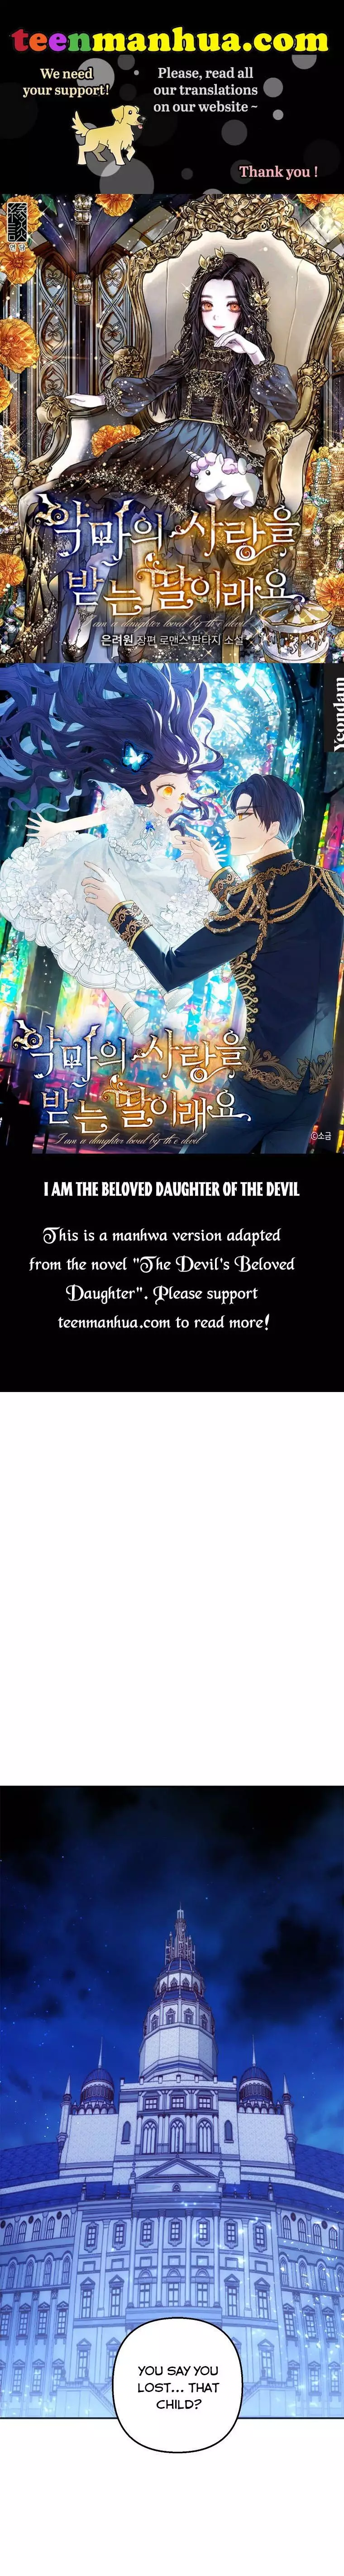 I Am A Daughter Loved By The Devil - 8 page 1-dd27e901